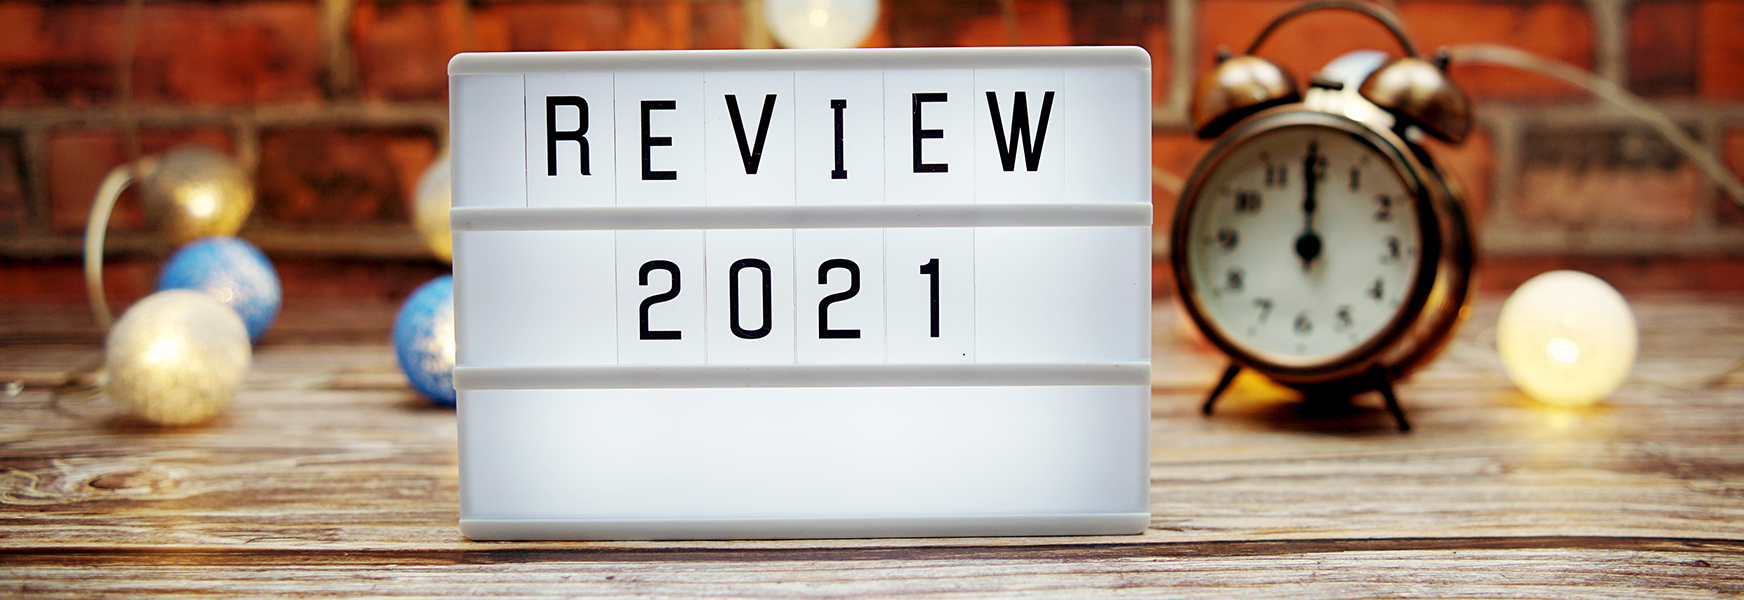 Marquee sign reading "Review 2021" on wooden tabletop against festive brick background